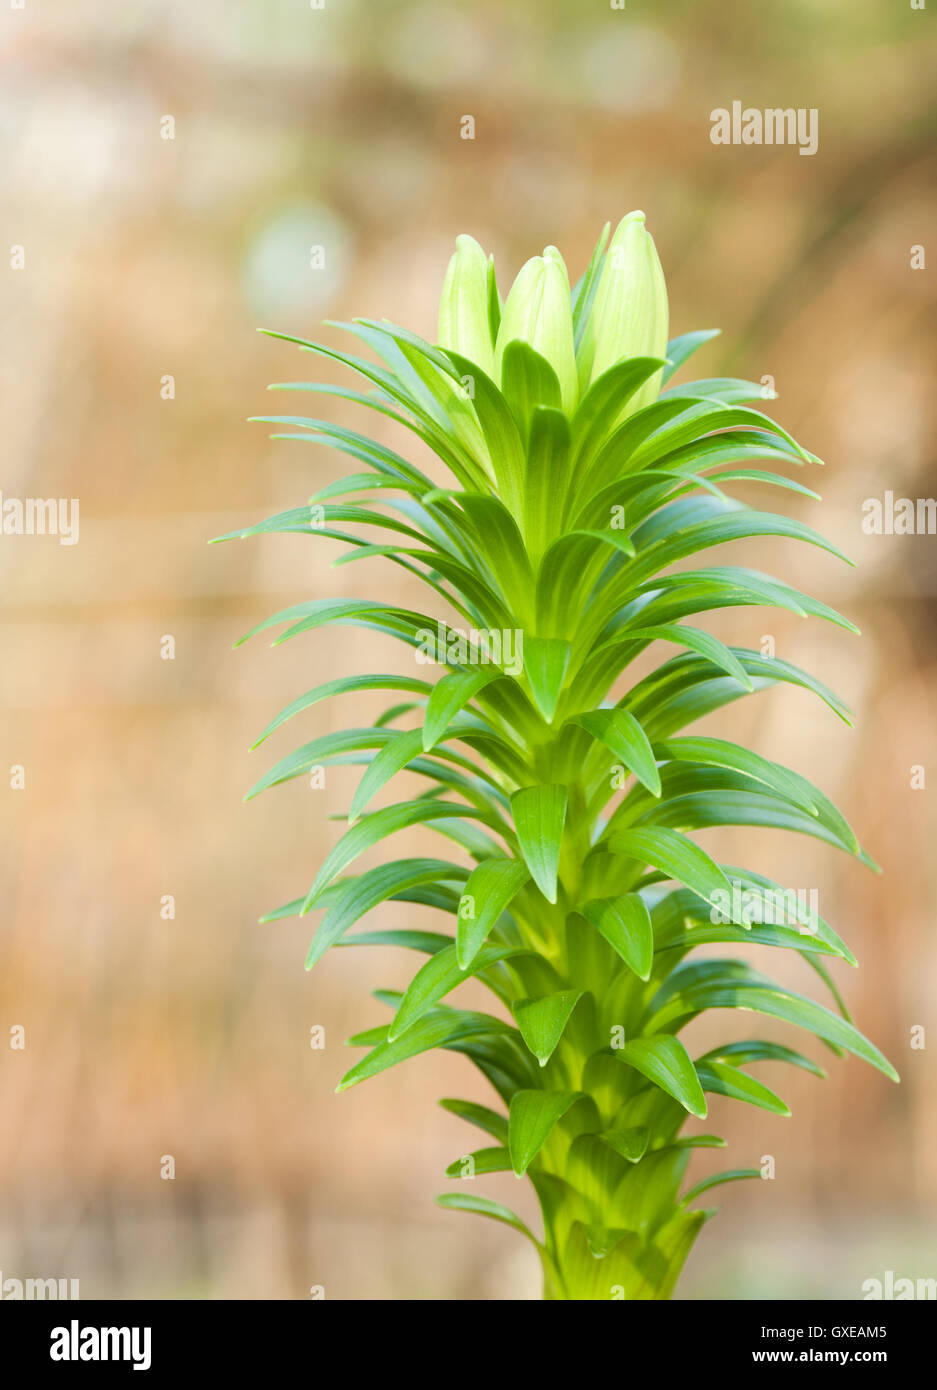 Botanic gardening nature image: young spring sprout of white lily (lilium) with three buds closeup over blurred background. Stock Photo